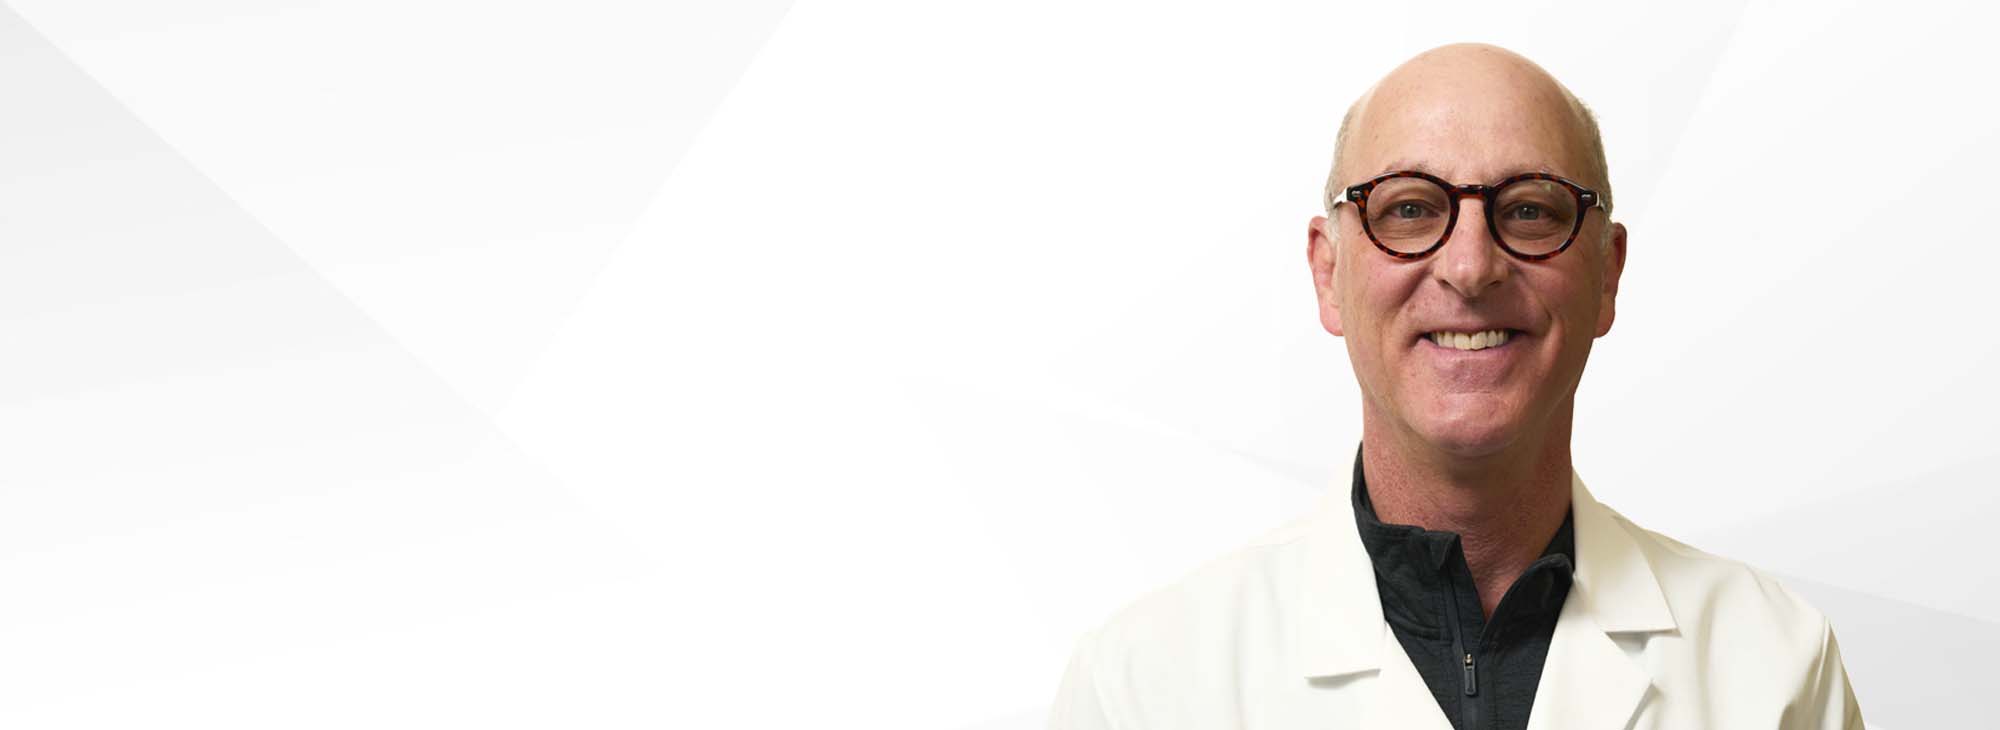 joint replacement doctors near syracuse ny image of Brett B Greenky, MD